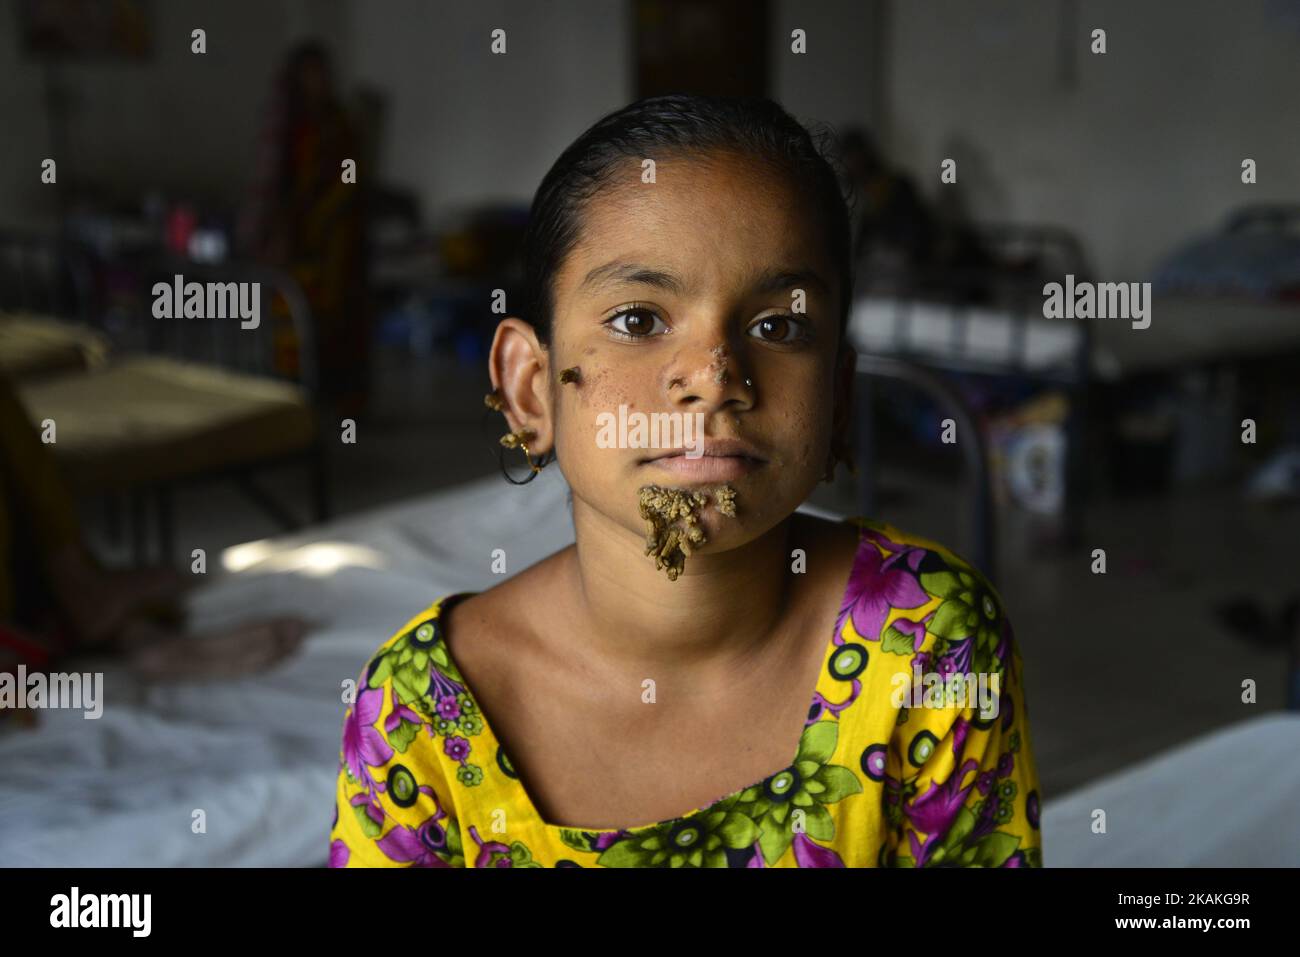 In this photograph taken on January 30, 2017, Bangladeshi patient Sahana Khatun, 10, poses for a photograph at the Dhaka Medical College and Hospital. A young Bangladeshi girl with bark-like warts growing on her face could be the first female ever afflicted by so-called 'tree man syndrome', doctors studying the rare condition said January 31. Ten-year-old Sahana Khatun has the tell-tale gnarled growths sprouting from her chin, ear and nose, but doctors at Dhaka's Medical College Hospital are still conducting tests to establish if she has the unusual skin disorder. (Photo by Mamunur Rashid/NurP Stock Photo